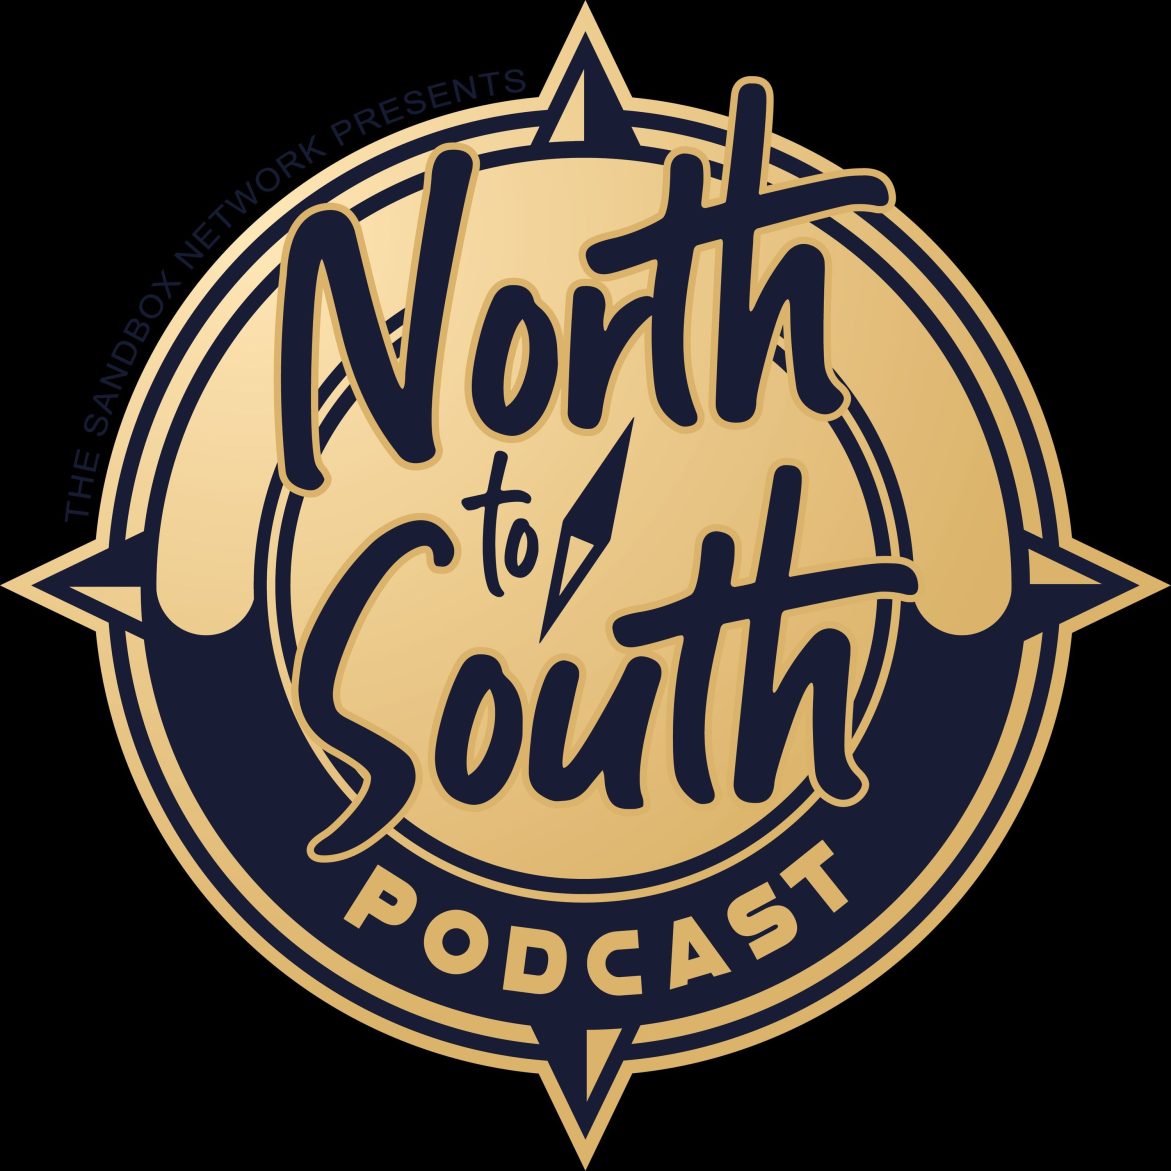 Black Podcasting - North to South: Come On Sis